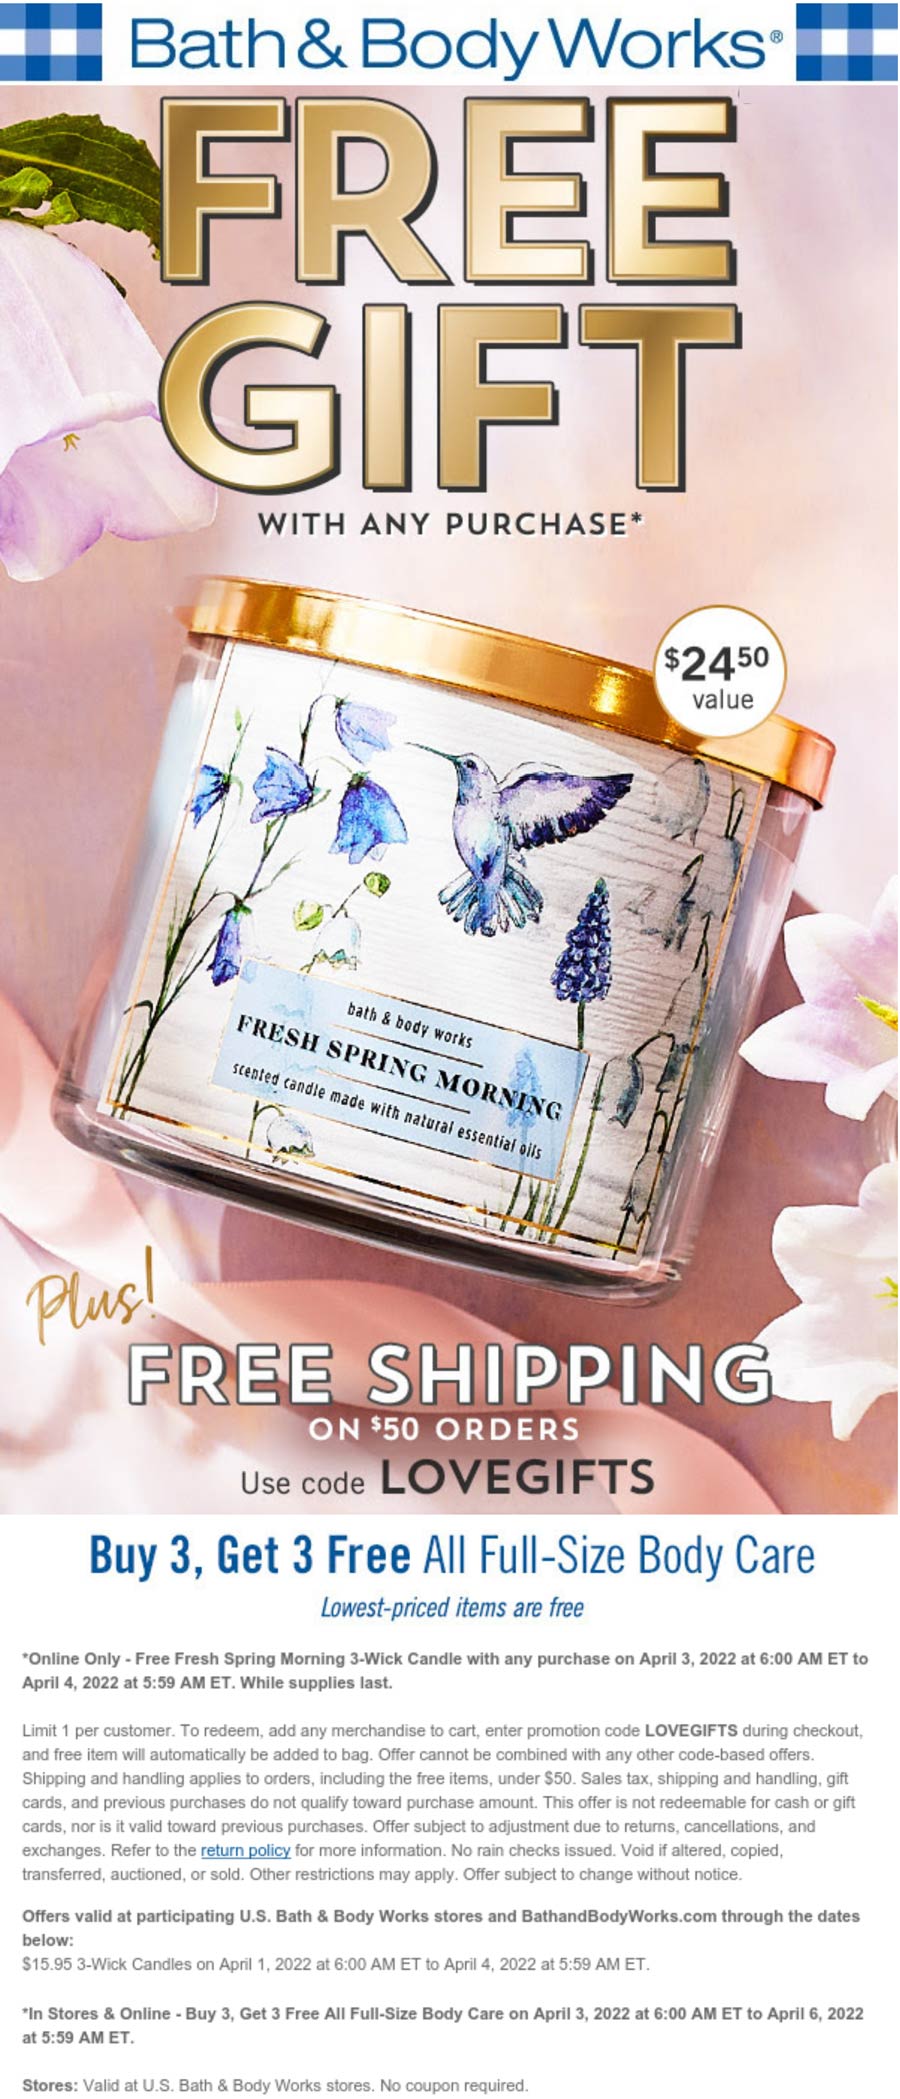 Bath & Body Works stores Coupon  6-for-3 on body care + free 3-wick candle today at Bath & Body Works via promo code LOVEGIFTS #bathbodyworks 